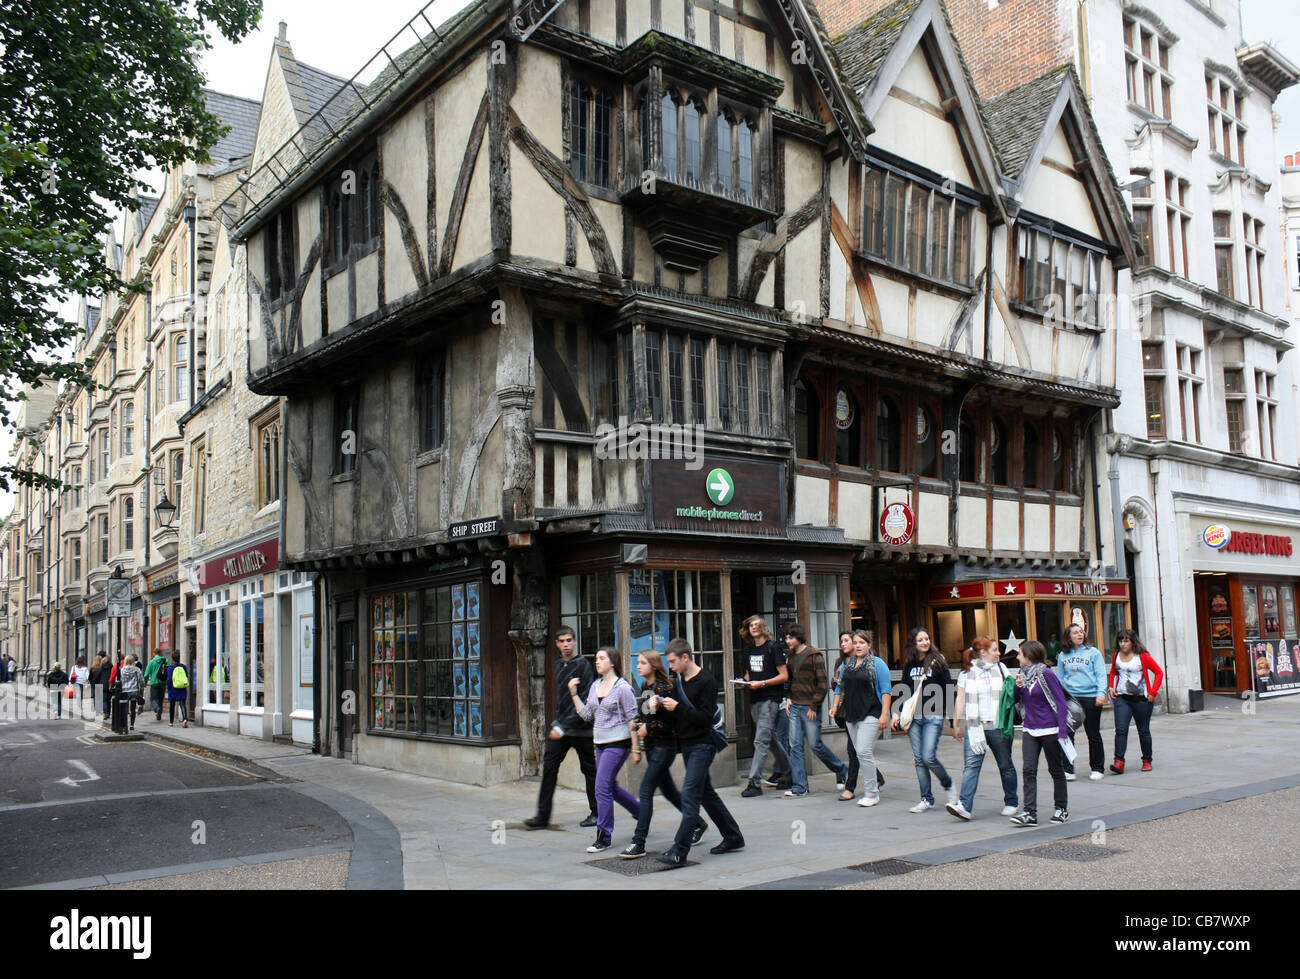 Oxford, Cornmarket street pedestrian shopping area, in front of 14th century shop Stock Photo